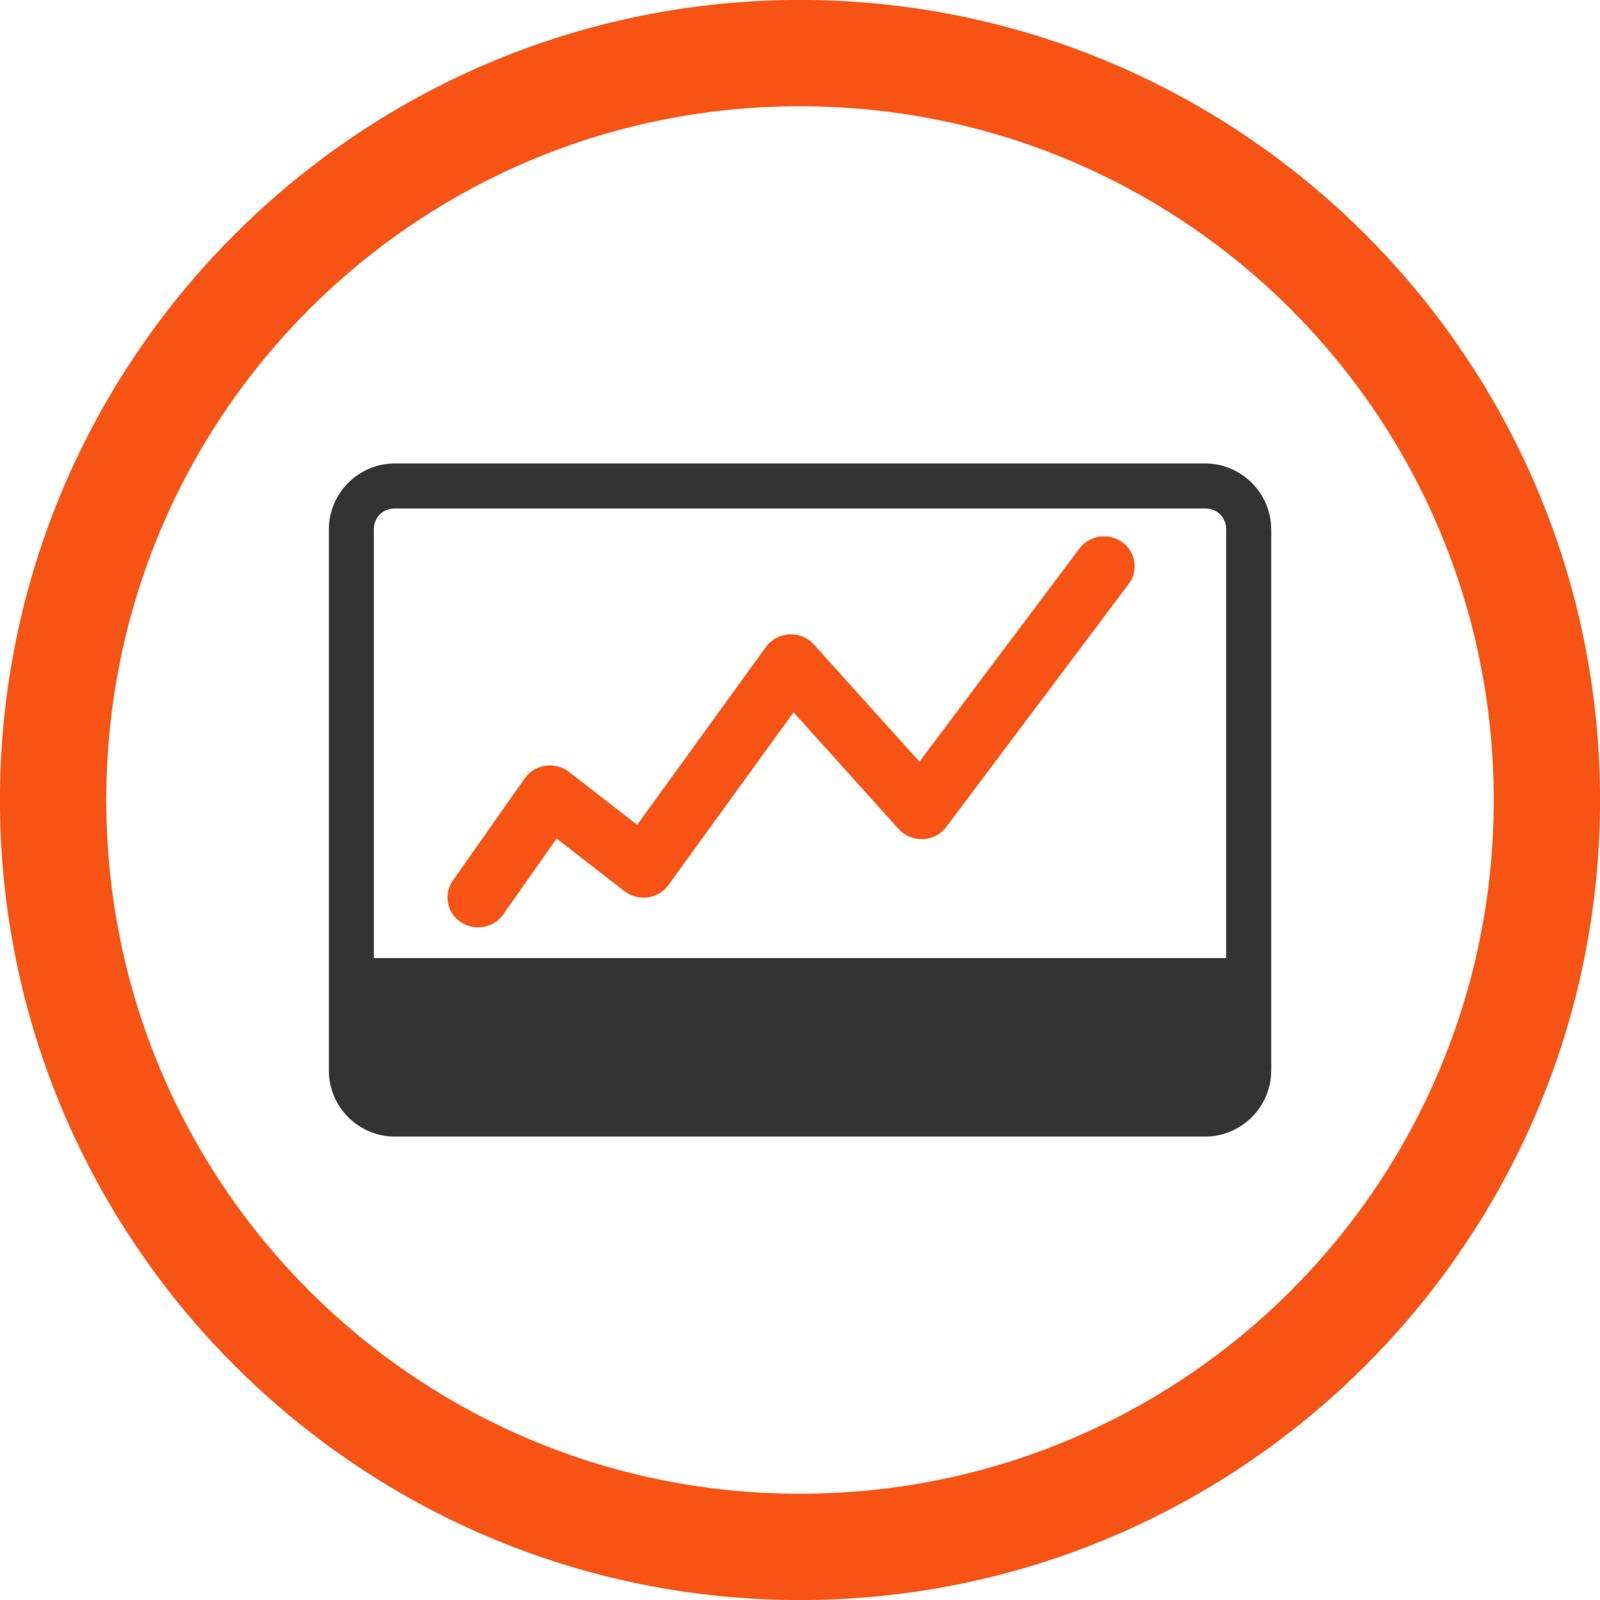 Stock Market vector icon. This flat rounded symbol uses orange and gray colors and isolated on a white background.